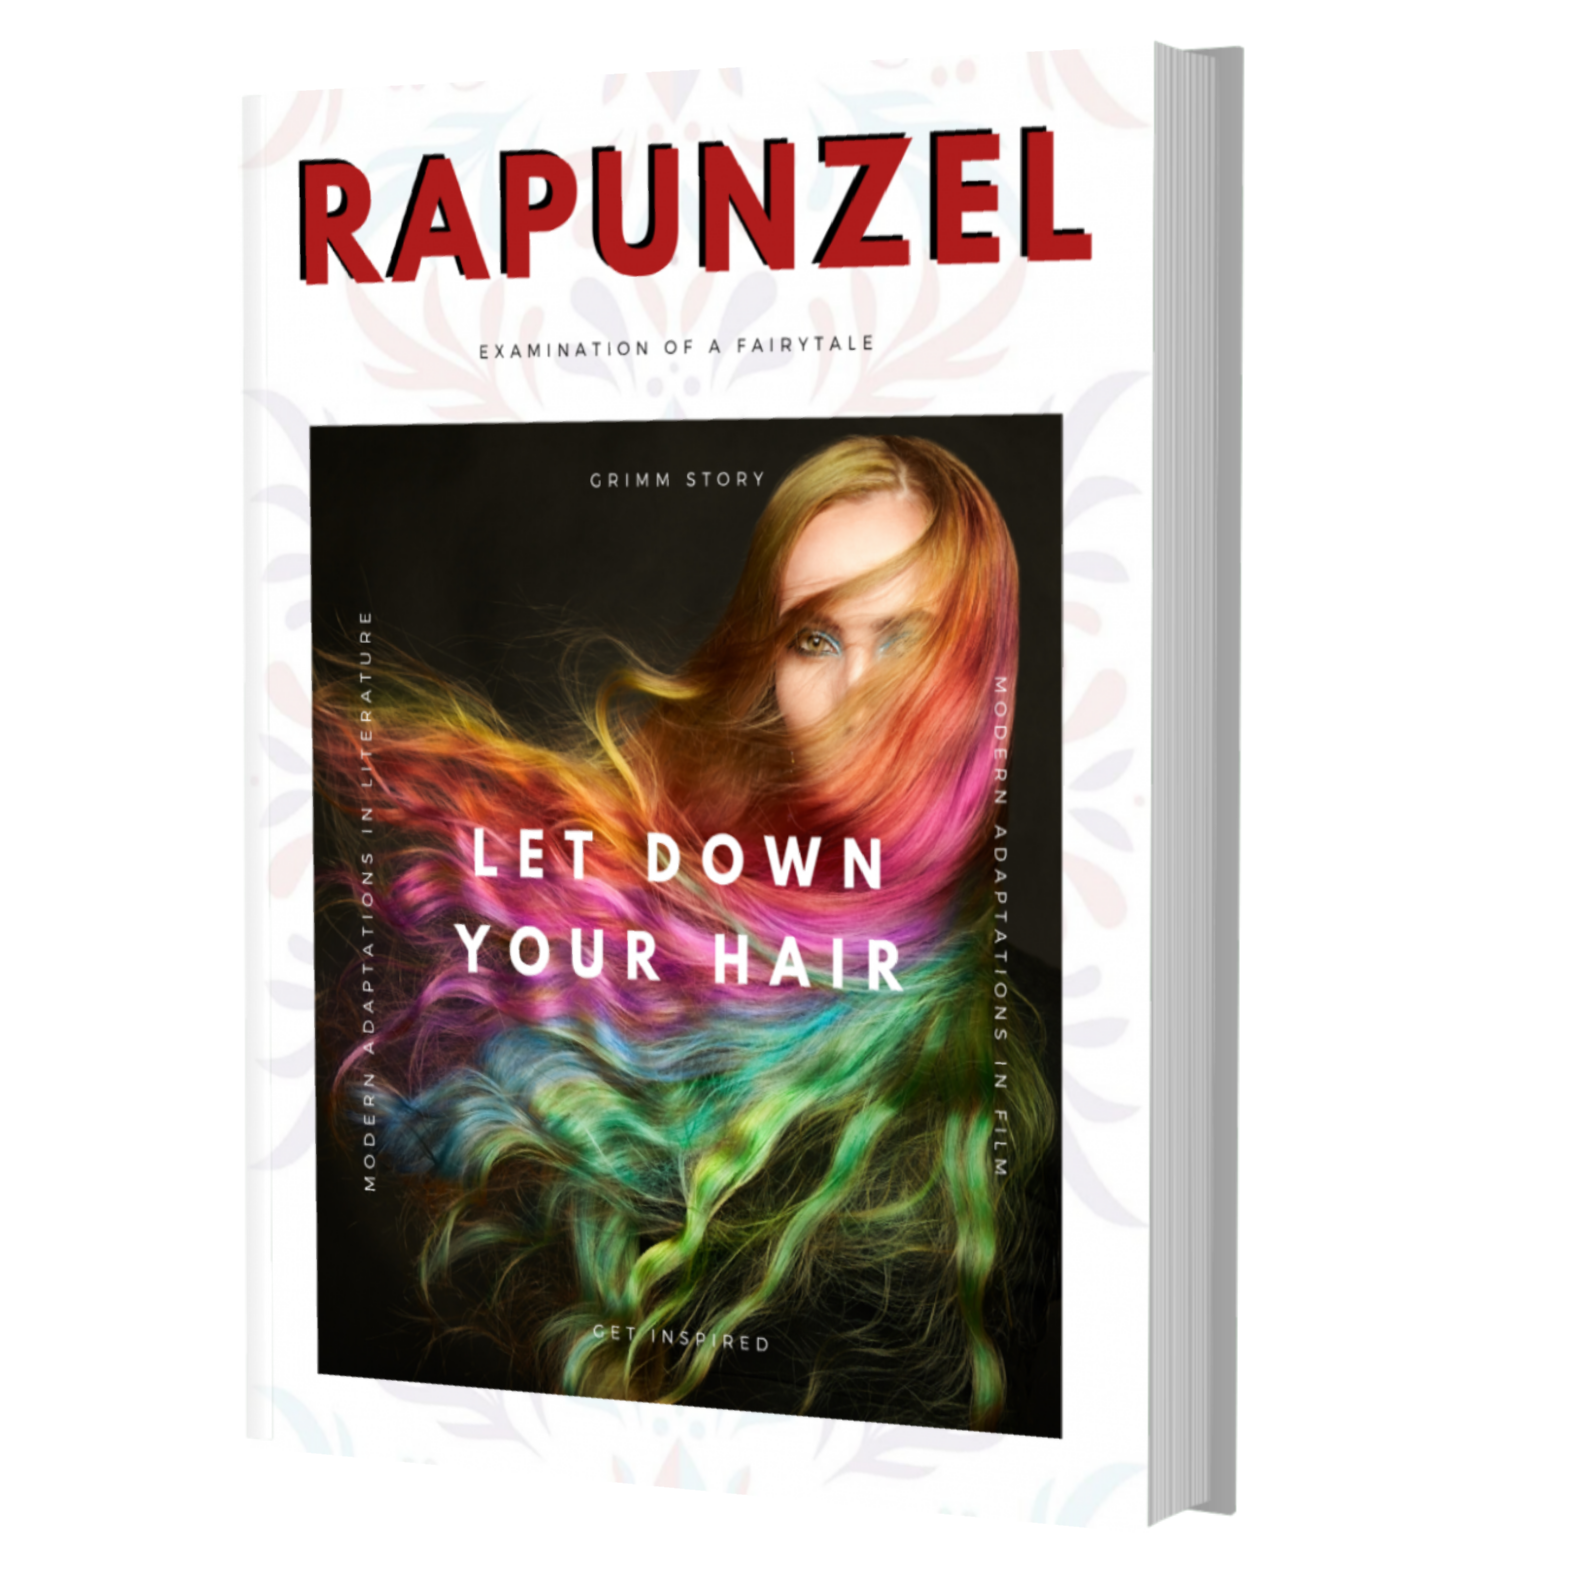 A mock book cover for the Rapunzel examinations of a fairytale ebook